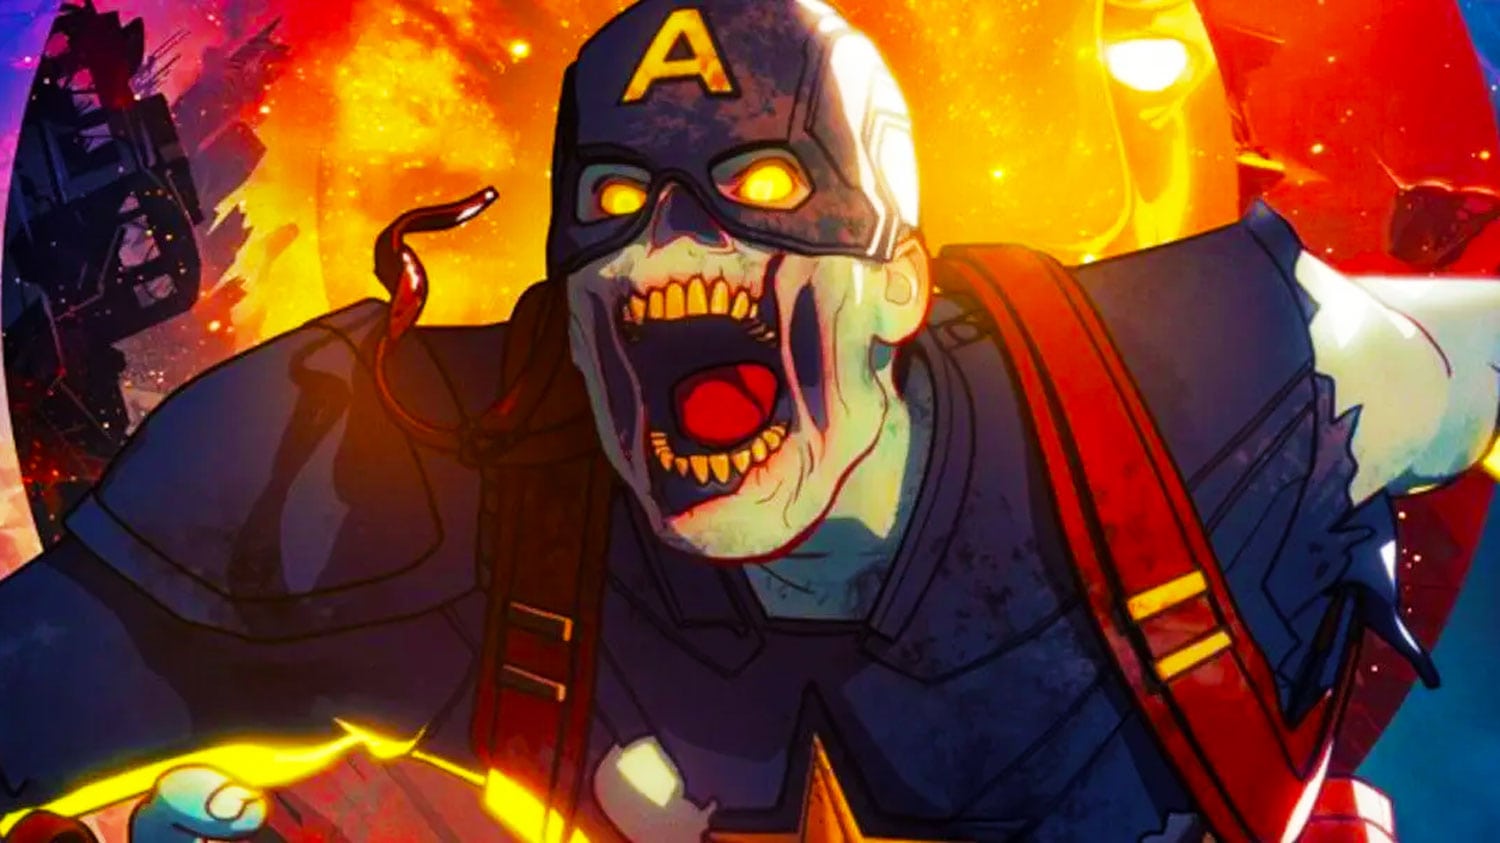 Marvel-Zombies-Rated-M-for-Mature-Disney-Plus